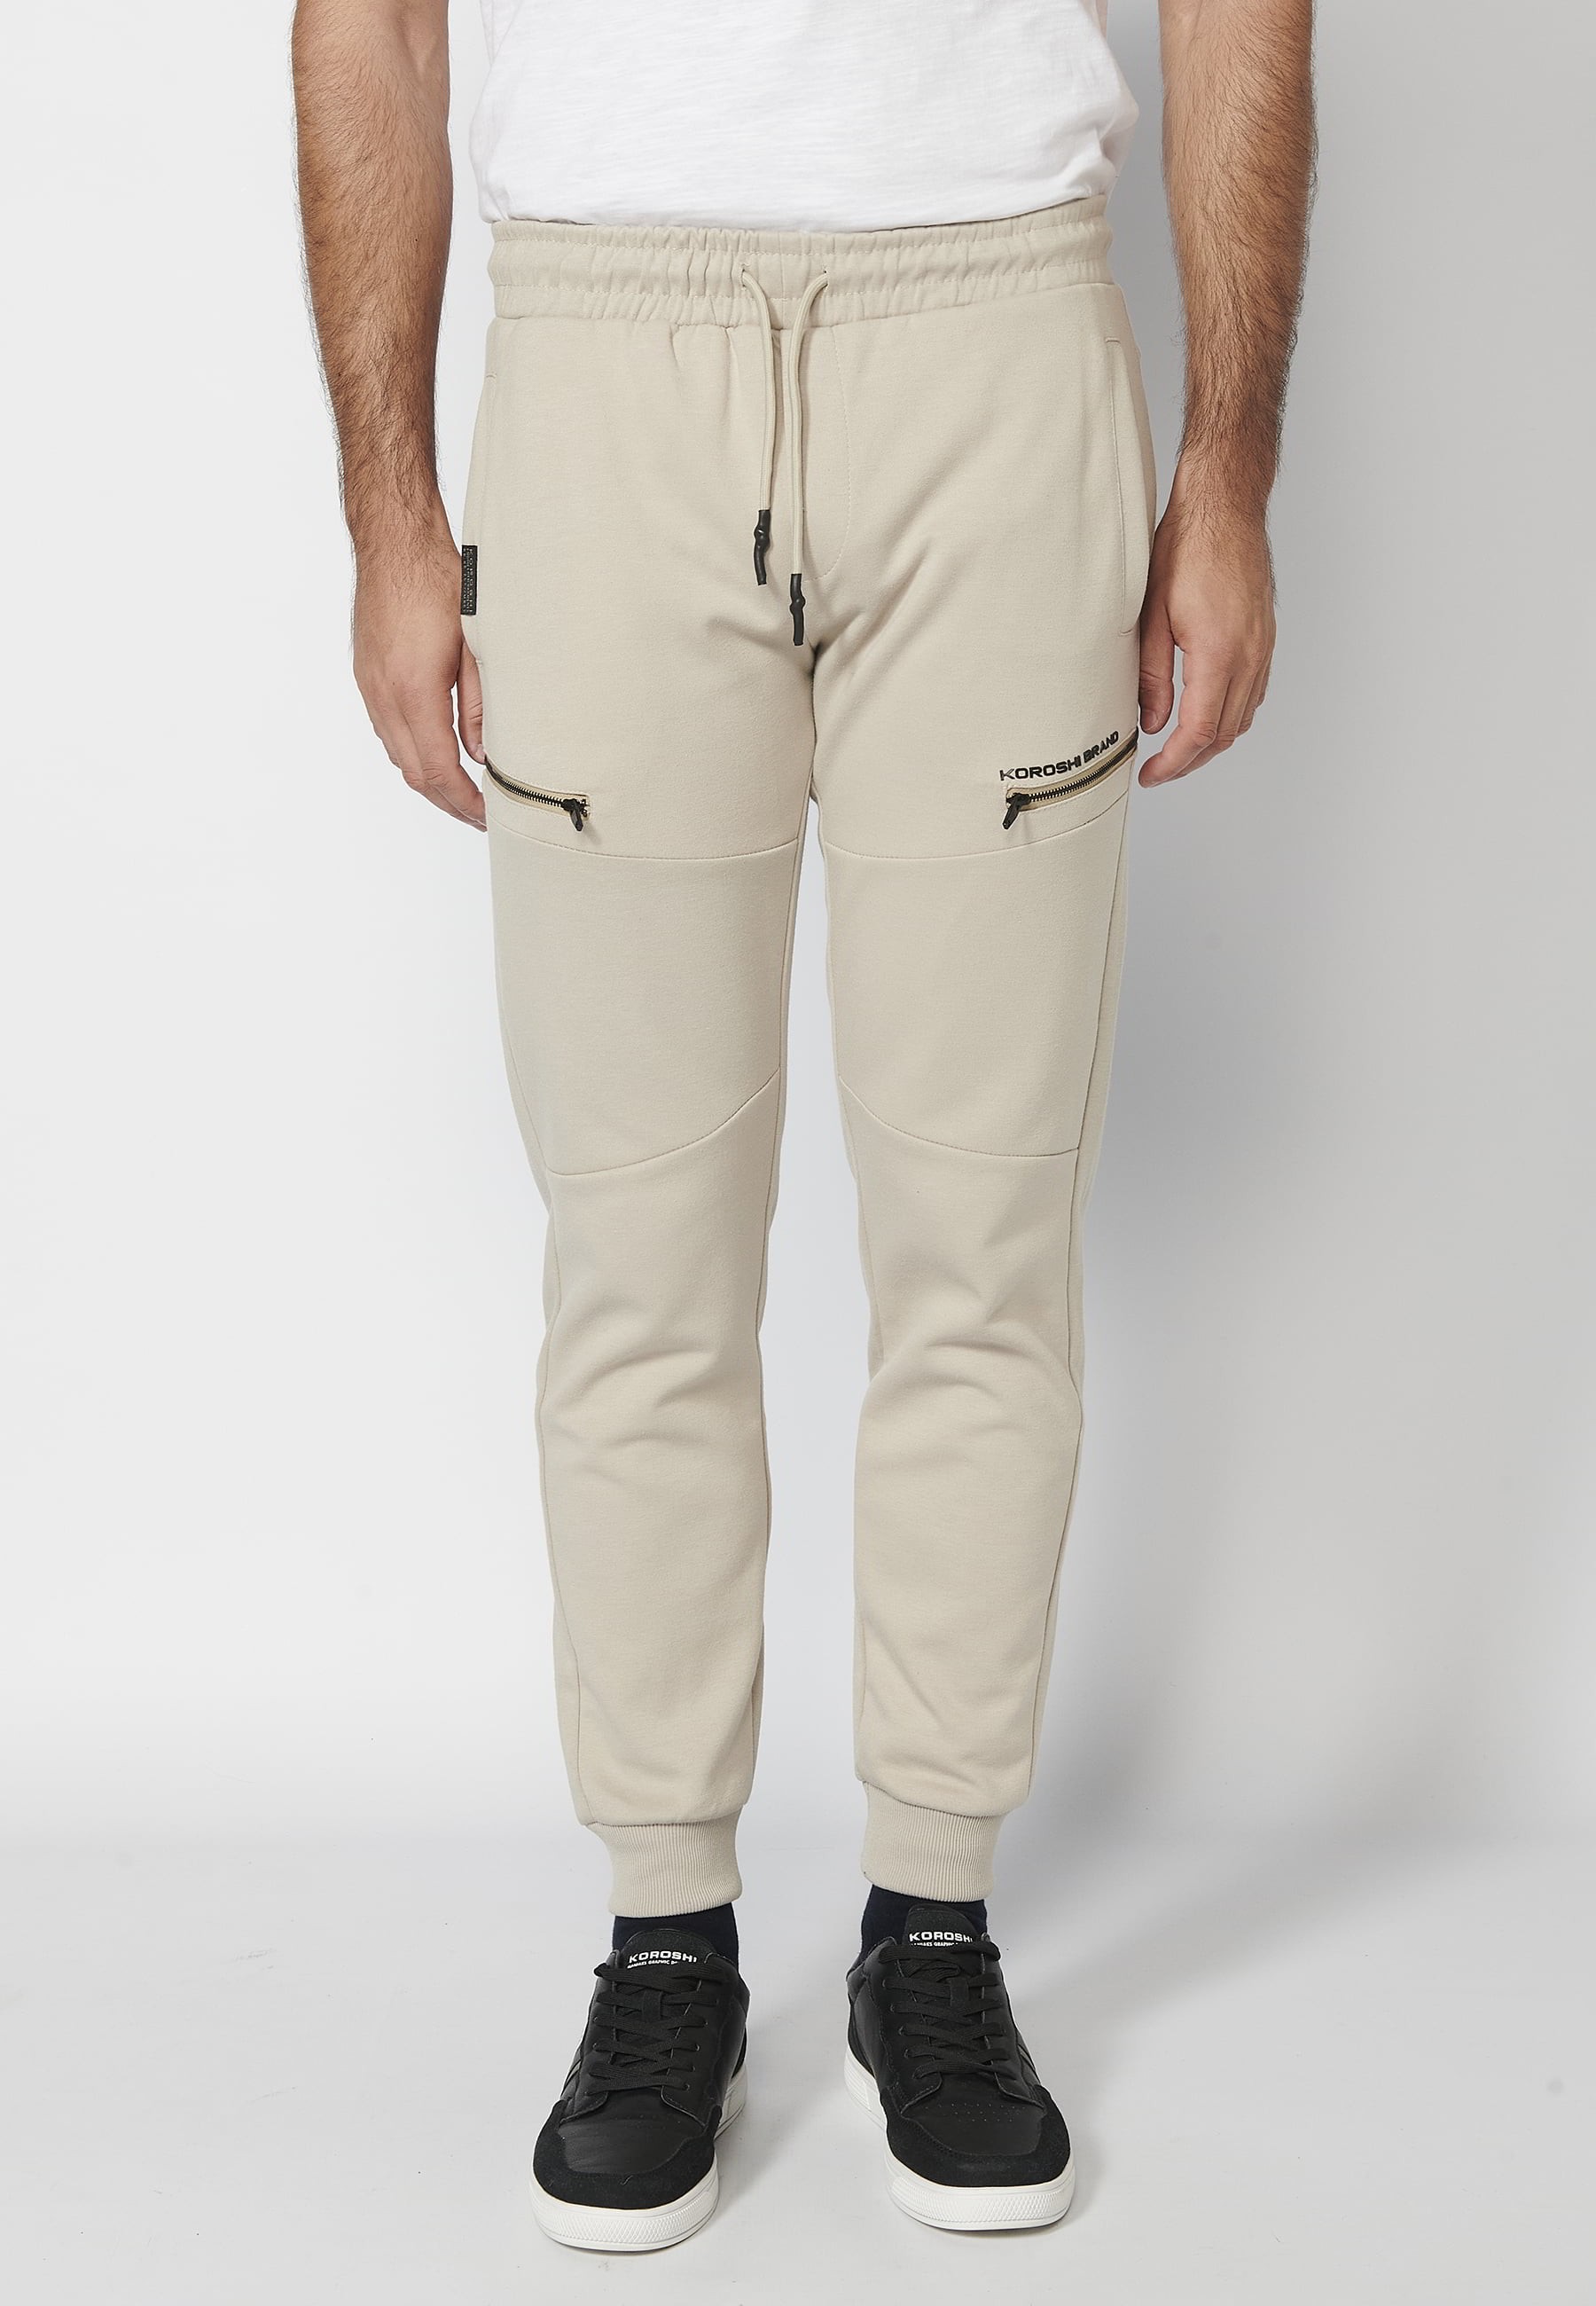 Long jogger pants with a rubberized waist and drawstring with cut-outs in the knees, Stone color, for Men 2